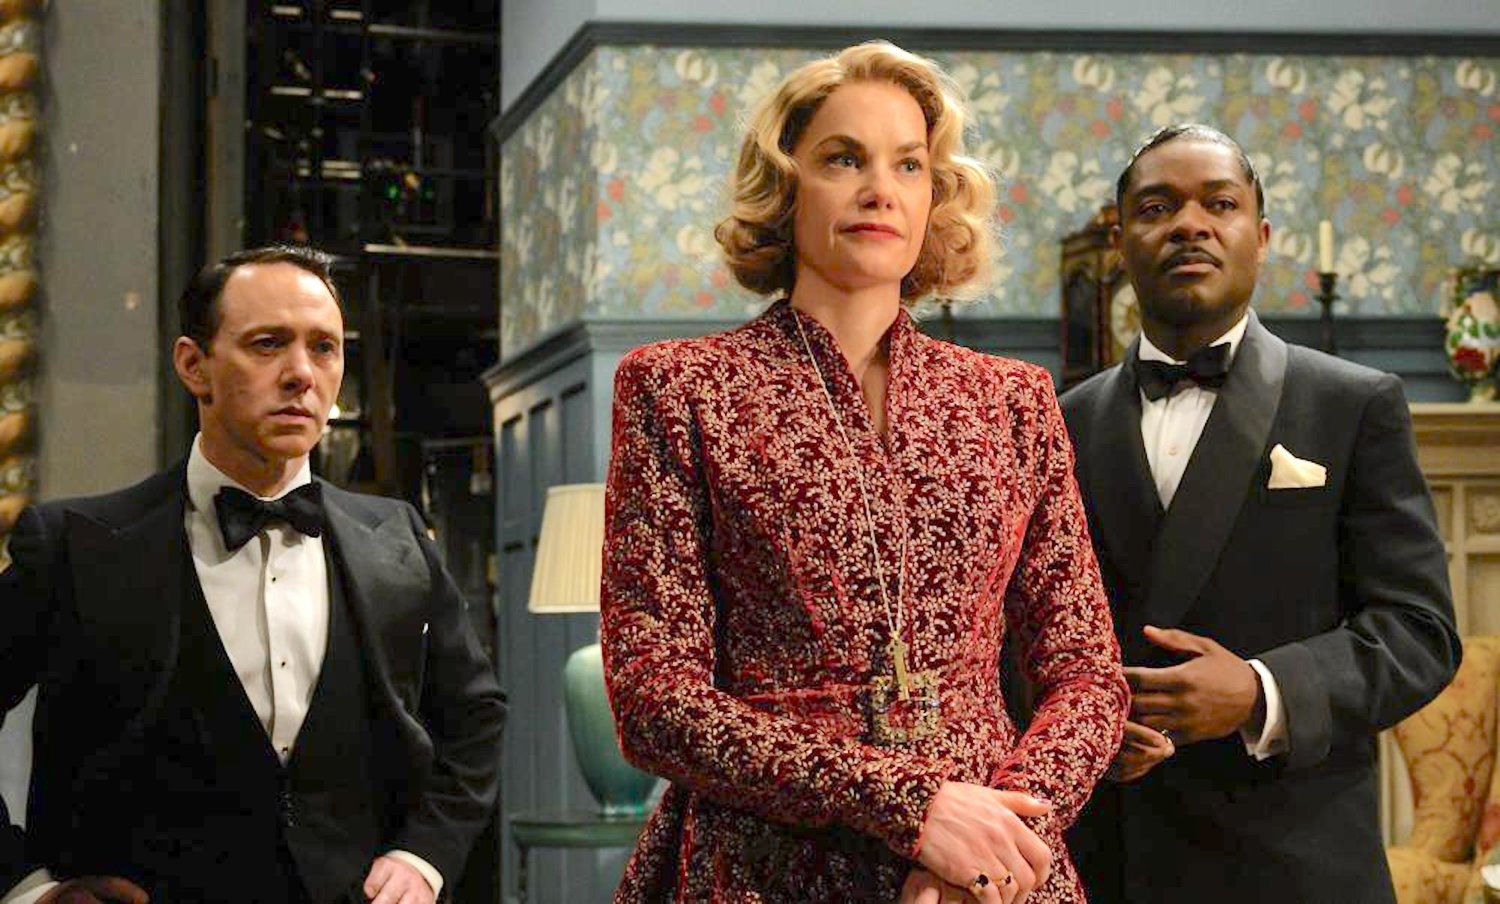 From left, Reece Shearsmith, Ruth Wilson and David Oyelowo in a scene from “See How They Run.”